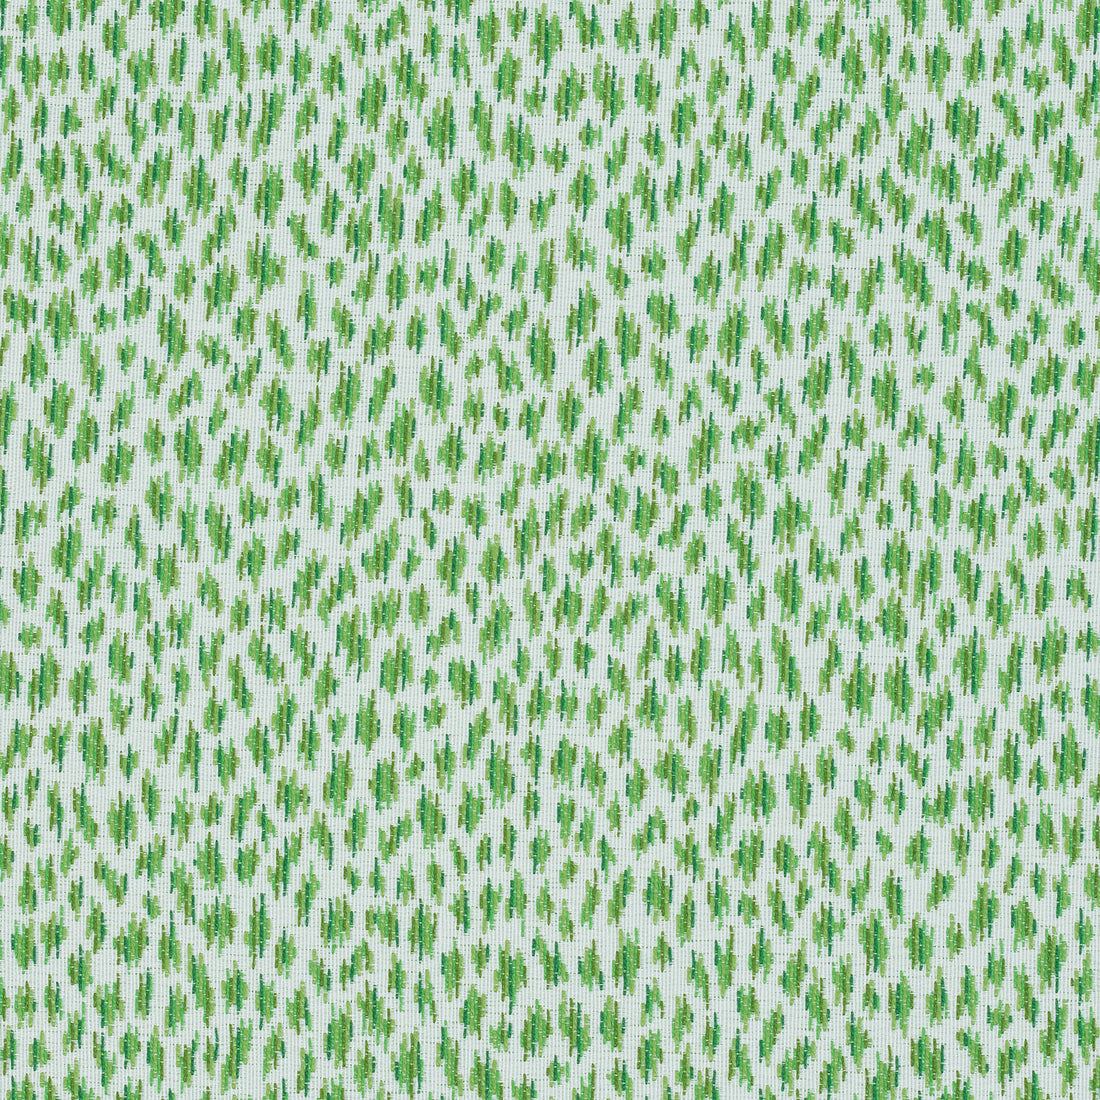 Citra fabric in grass color - pattern number W80456 - by Thibaut in the Woven Resource Vol 10 Menagerie collection